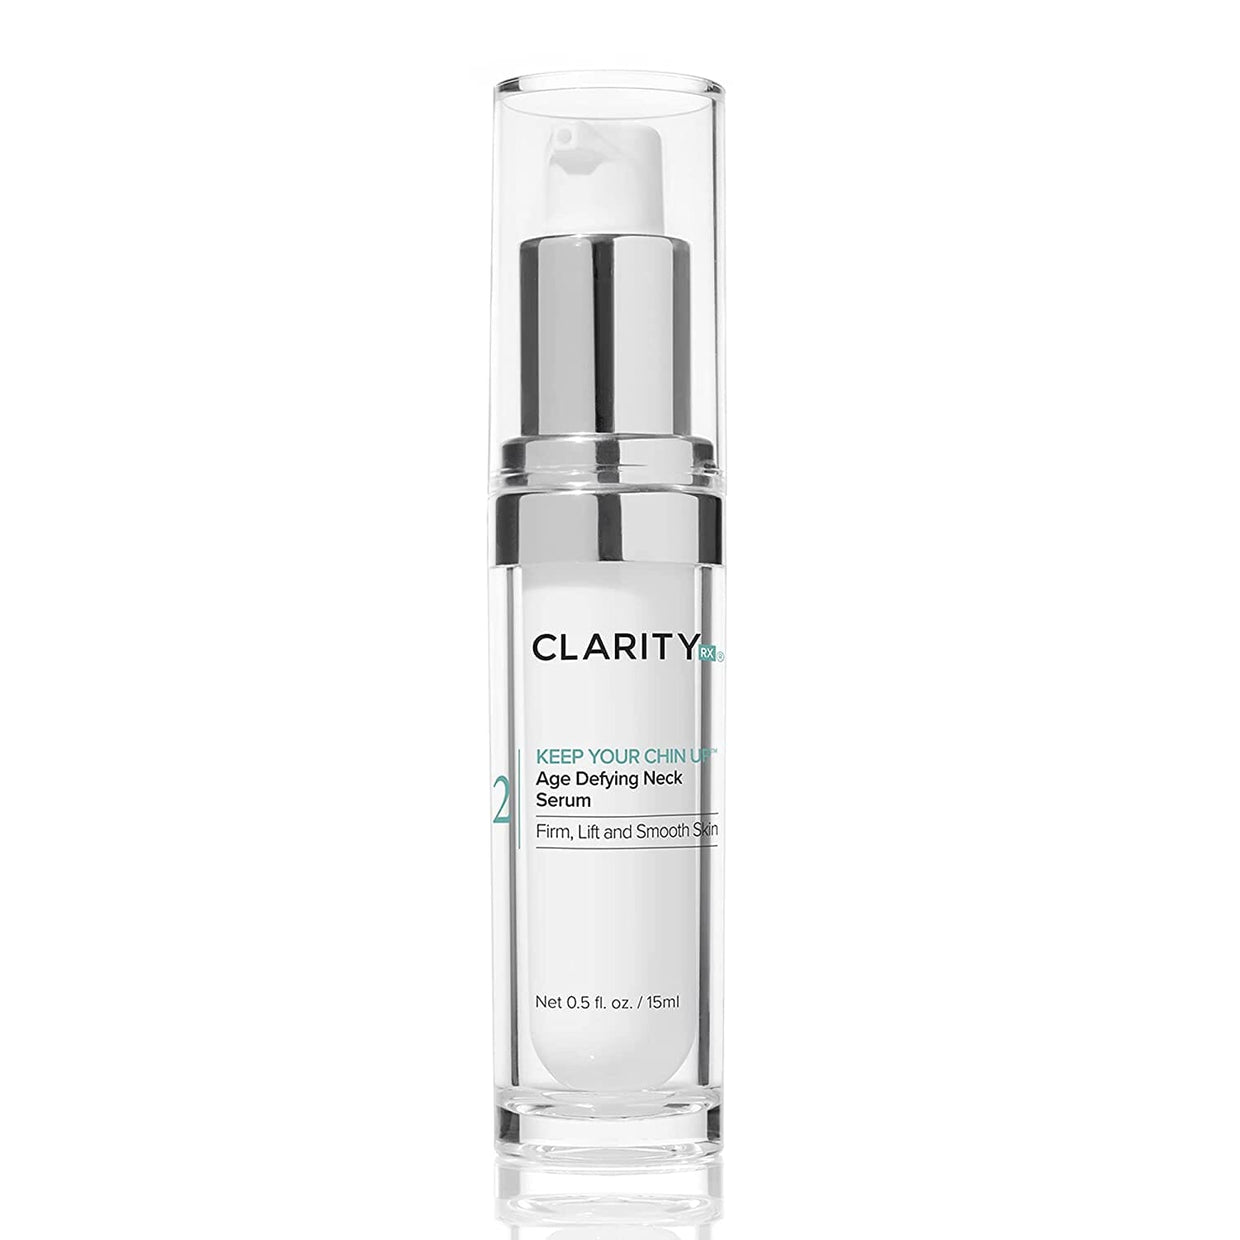 ClarityRx Keep Your Chin Up Age-Defying Neck Serum ClarityRx 0.5 oz. Shop at Exclusive Beauty Club